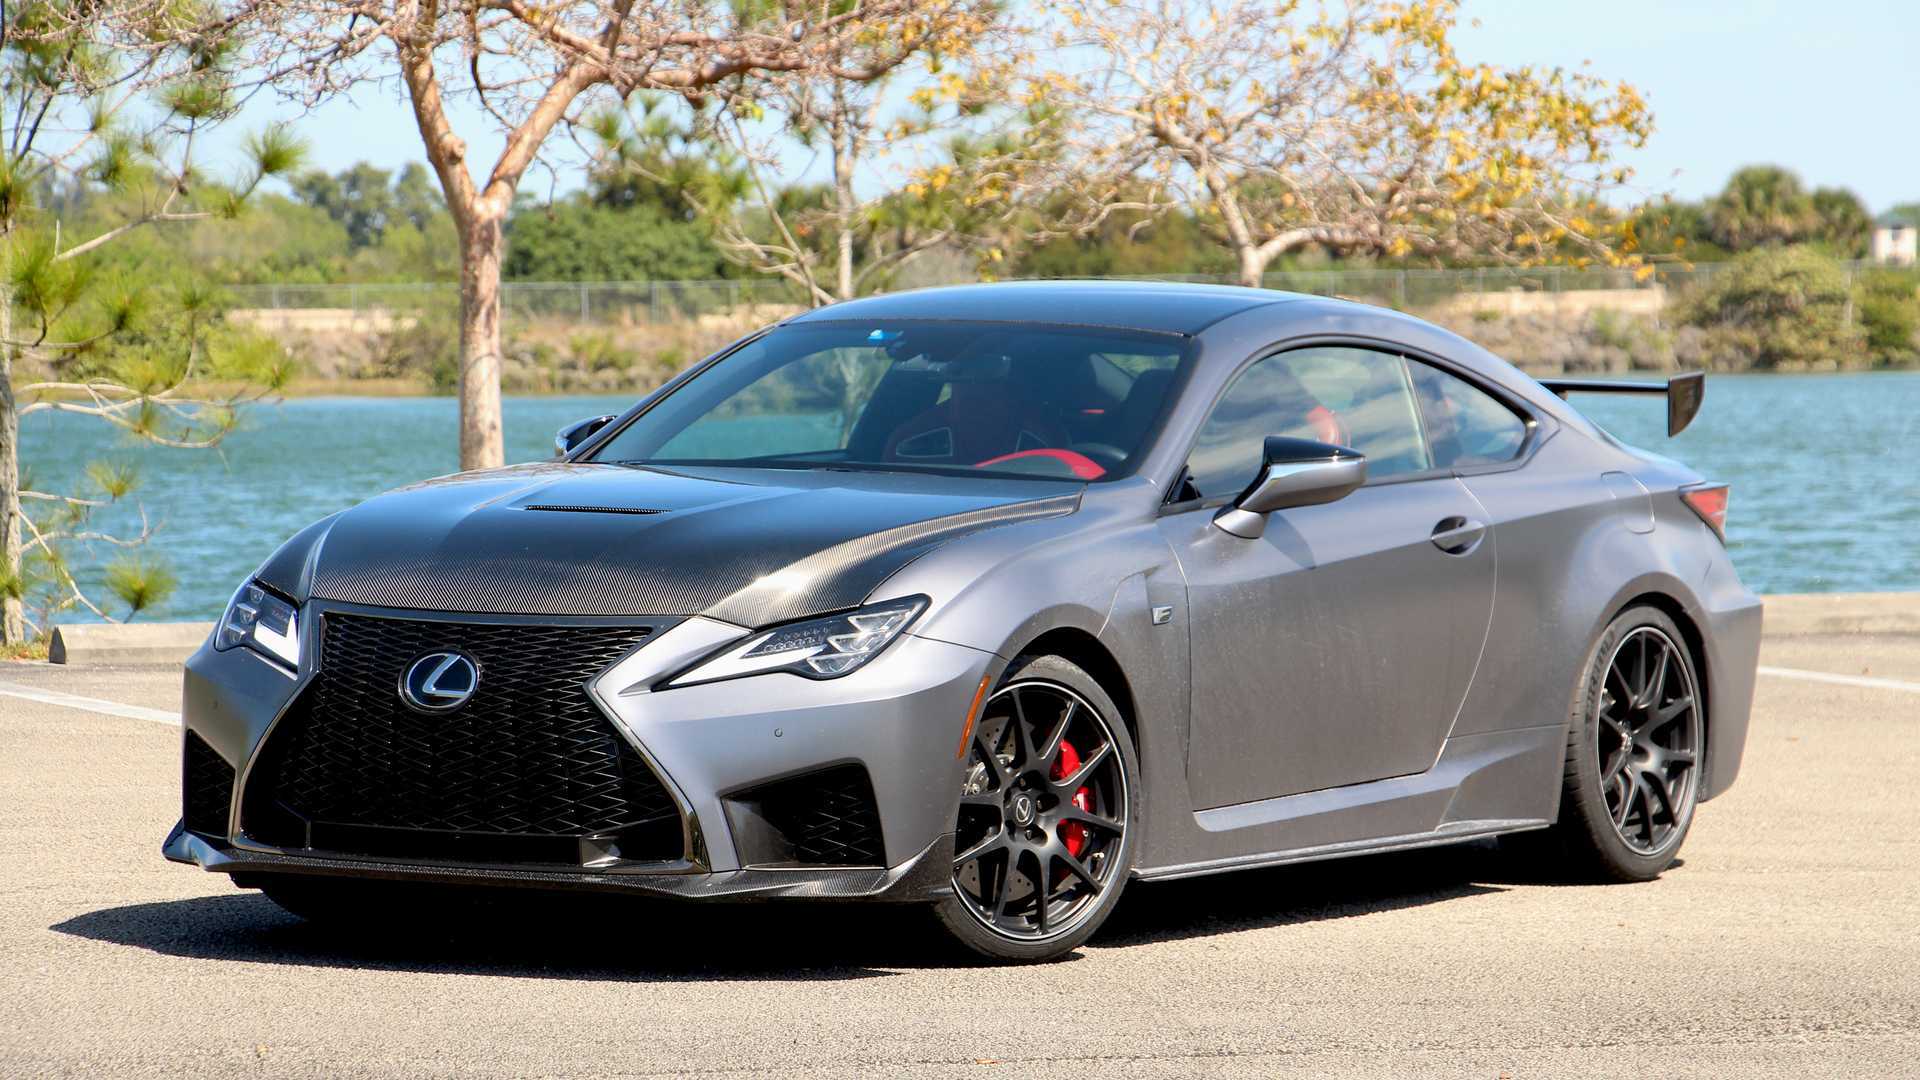 2020 Lexus RC F Track Edition Review: Bark Over Bite